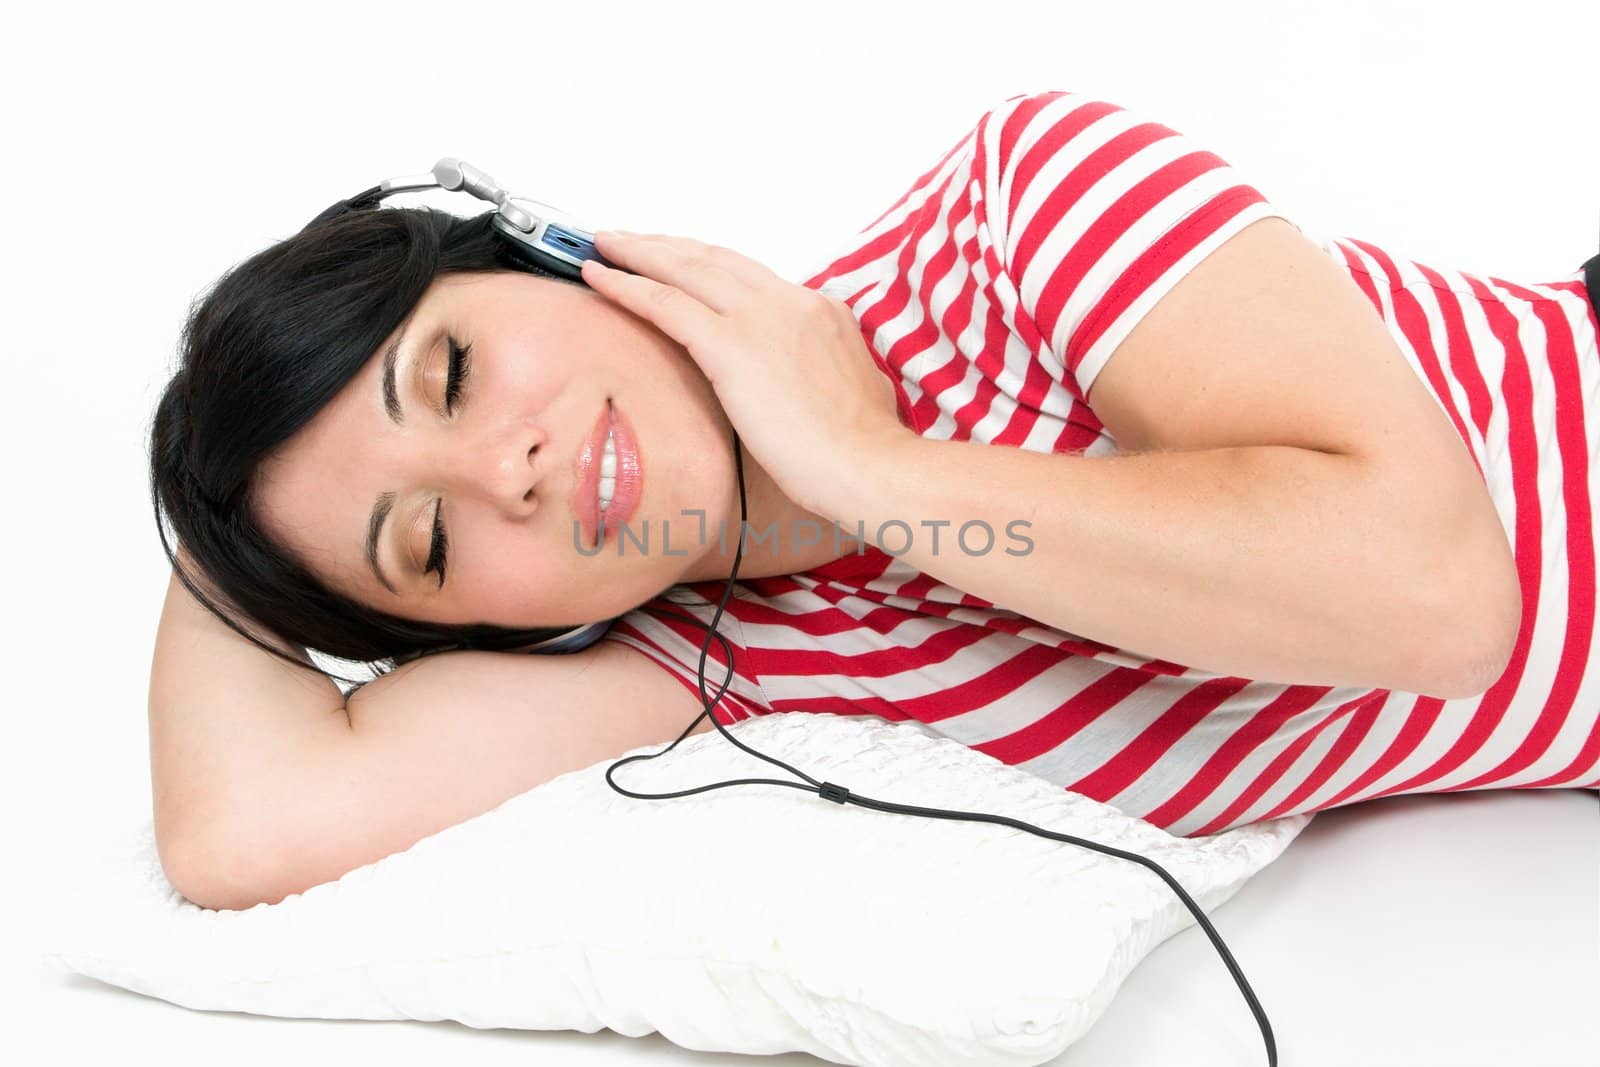 A woman at leisure relaxes to some music